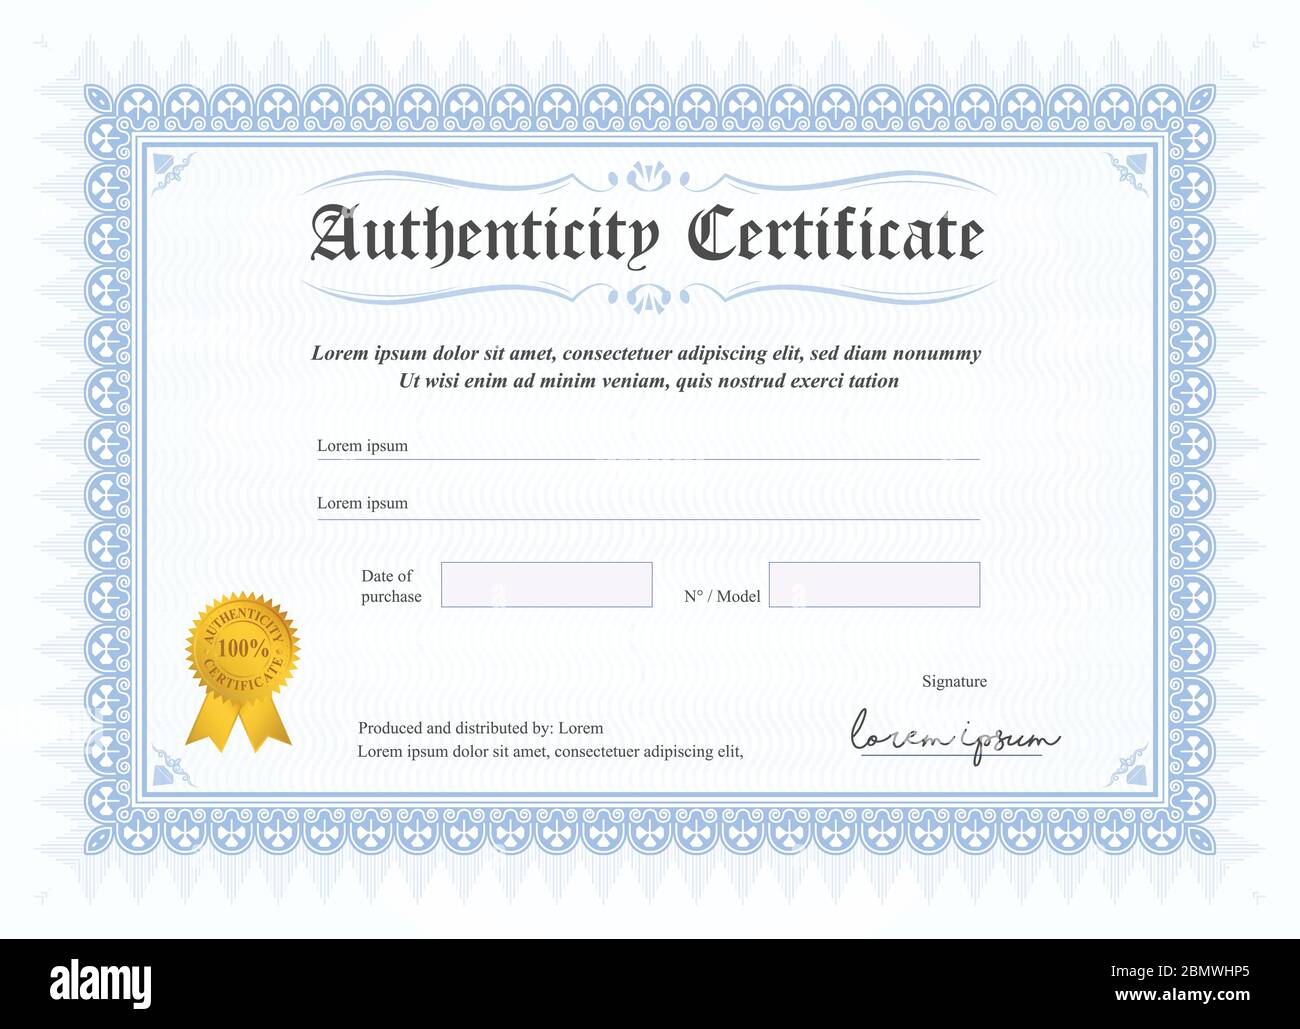 Certificate of authenticity, vector illustration with watermark and stamp. A5 format, blue colour Stock Vector